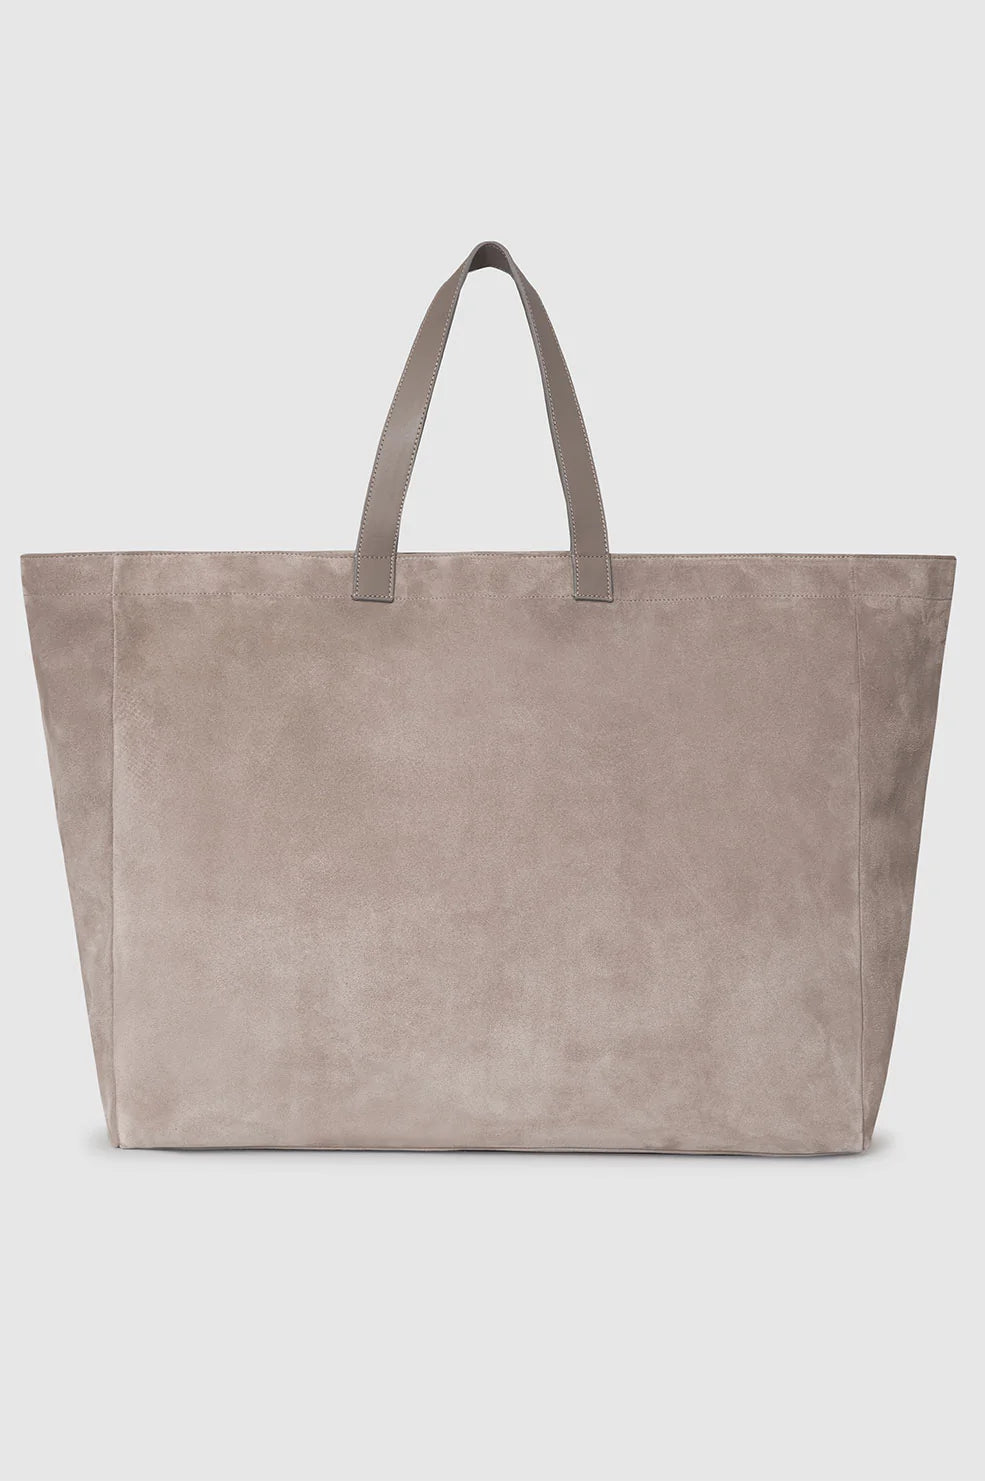 XL Rio Tote in Taupe Suede